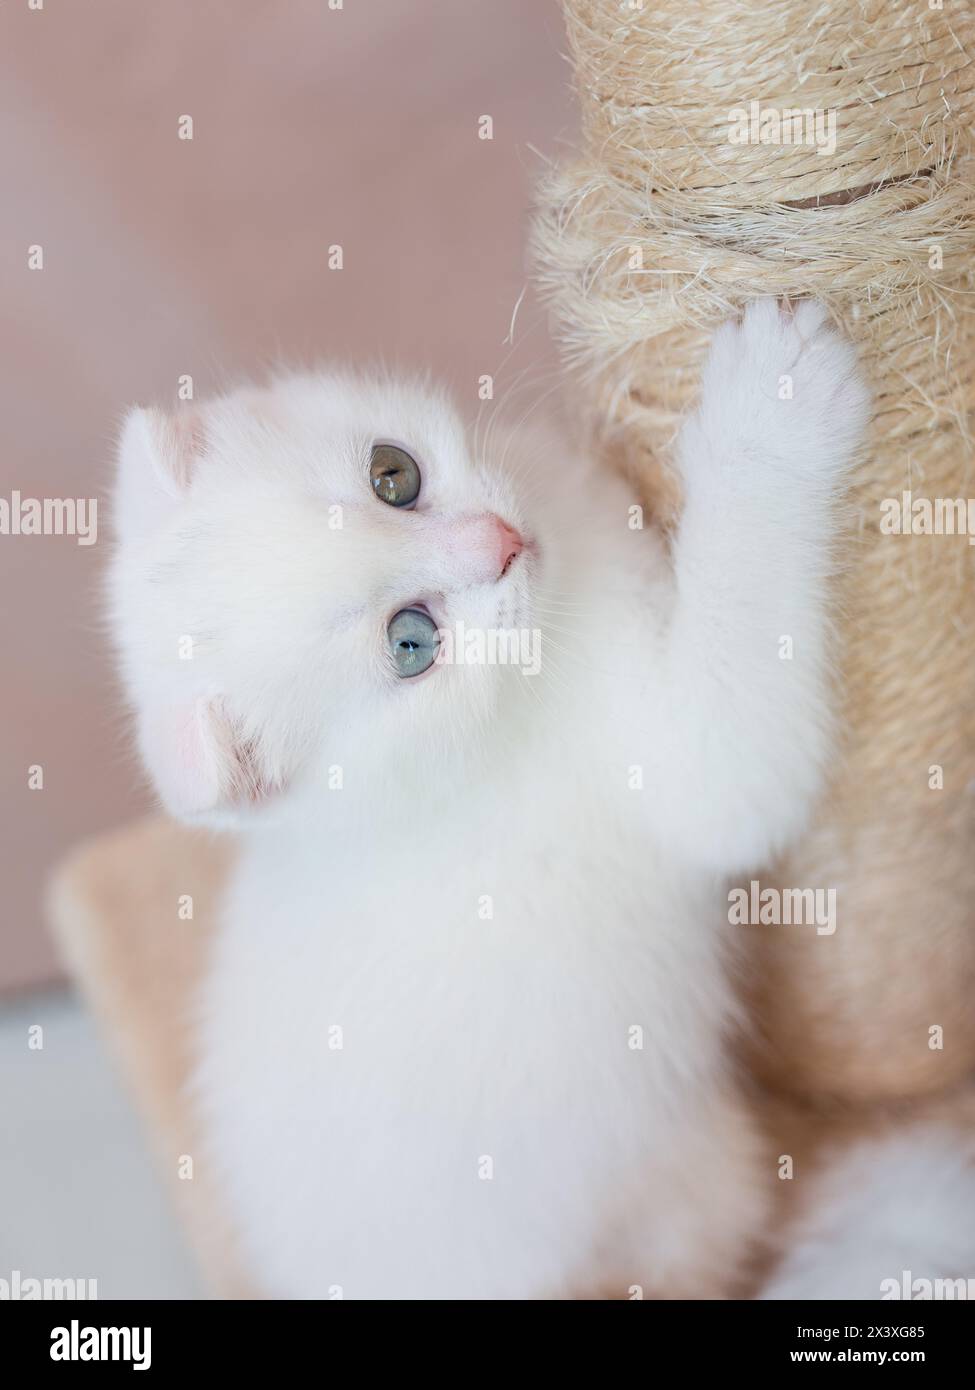 smile face. Cat. portrait of a cat close-up. white beautiful British long-haired cat smiling. The cat shows teeth. Stock Photo